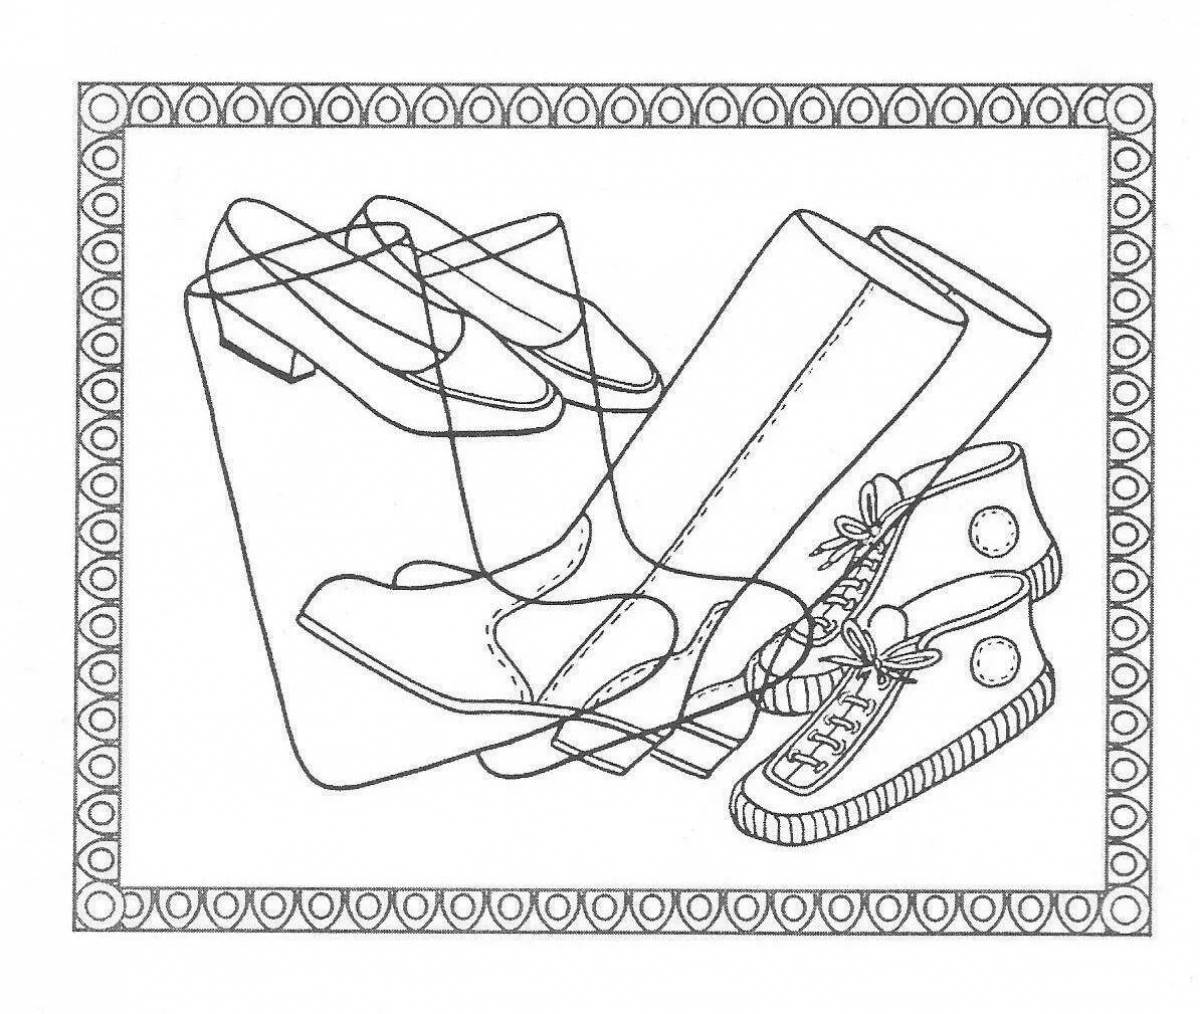 A fascinating coloring book for children types of shoes